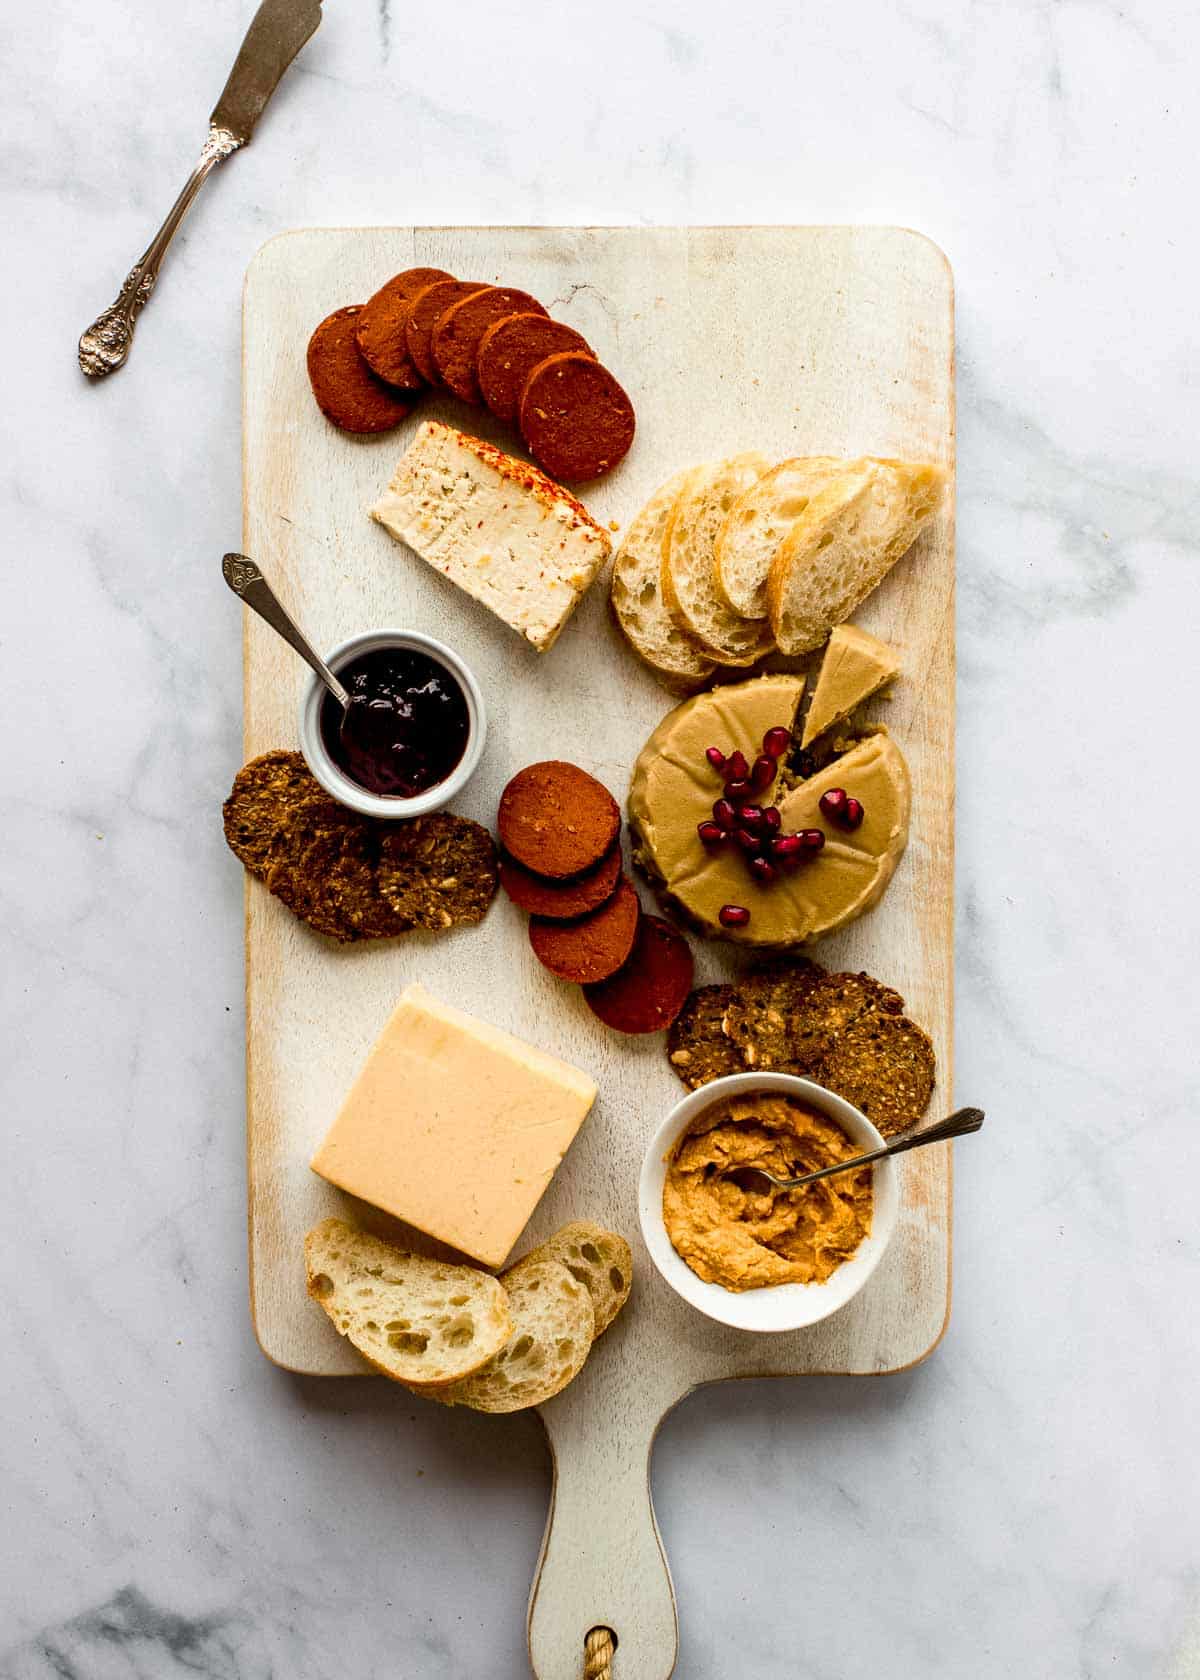 Half-made vegan charcuterie board, featuring plant-based pepperoni, vegan cheeses, crackers and bread.